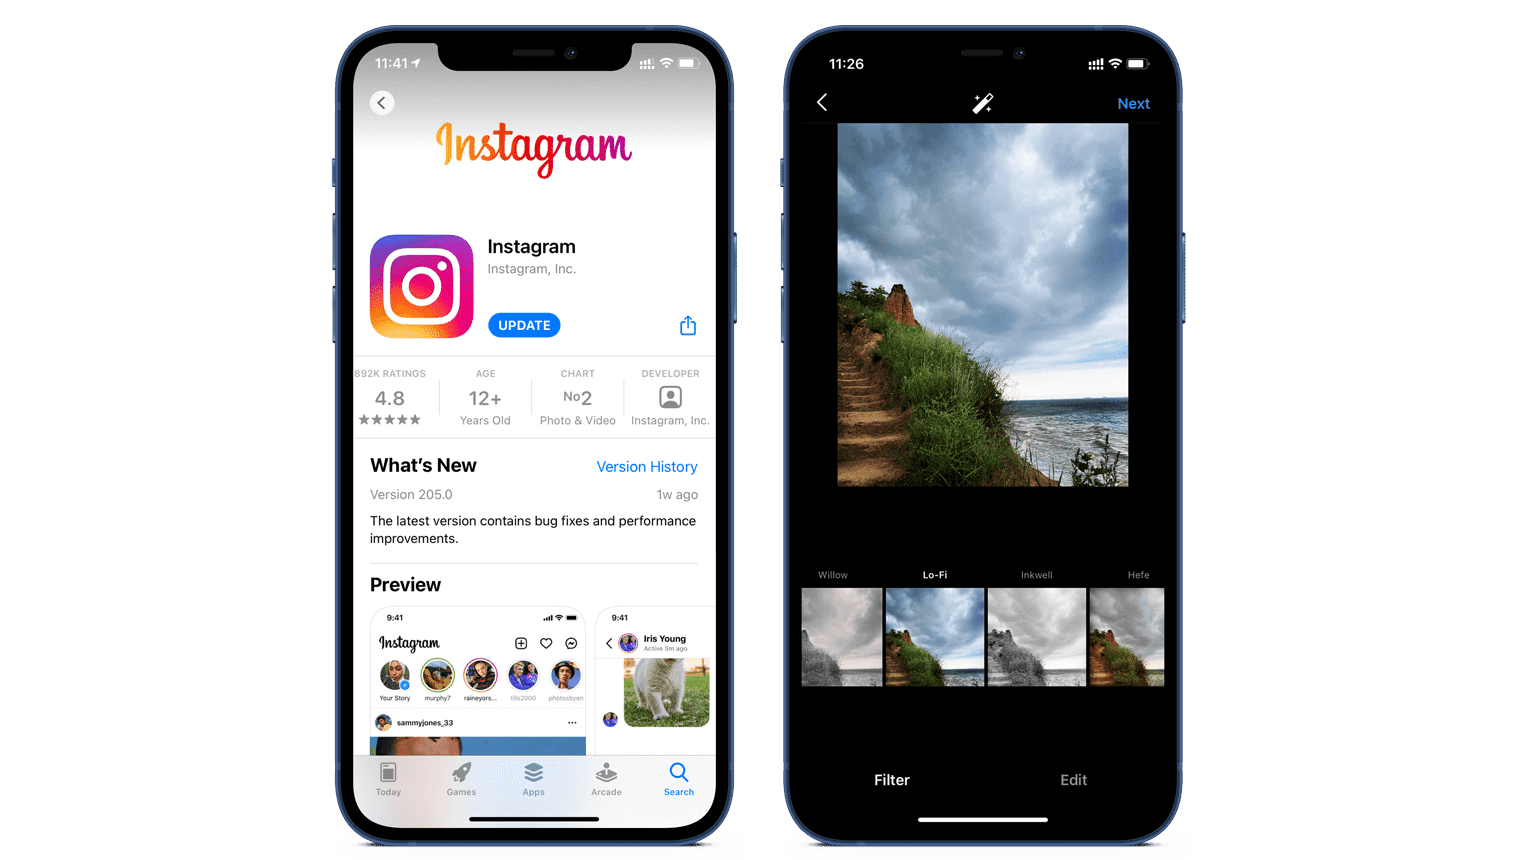 iPhone screens showing Instagram photo editor in App store